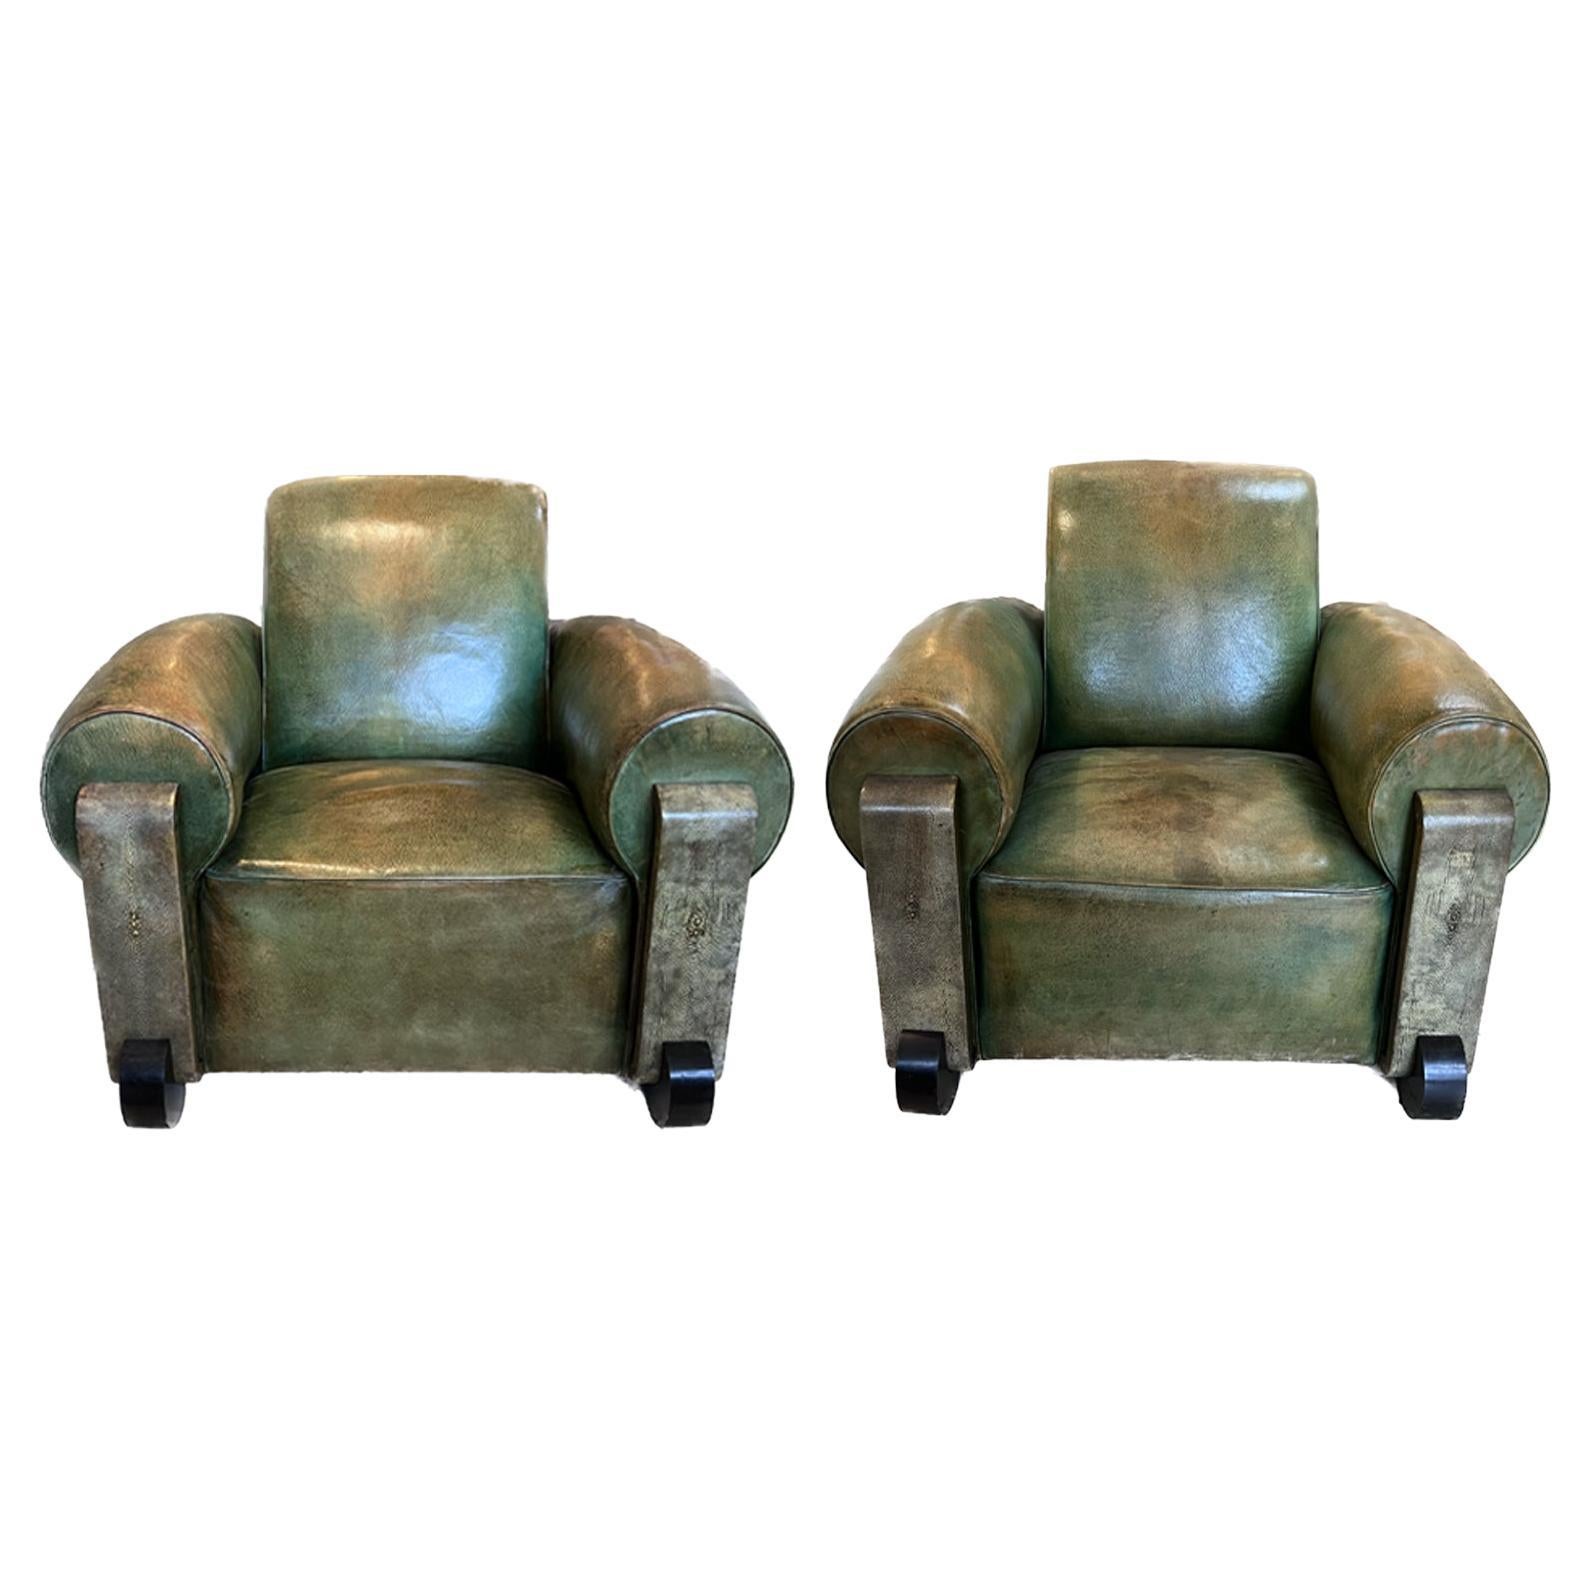 Pair of French Art Deco Leather/Stingray Chairs